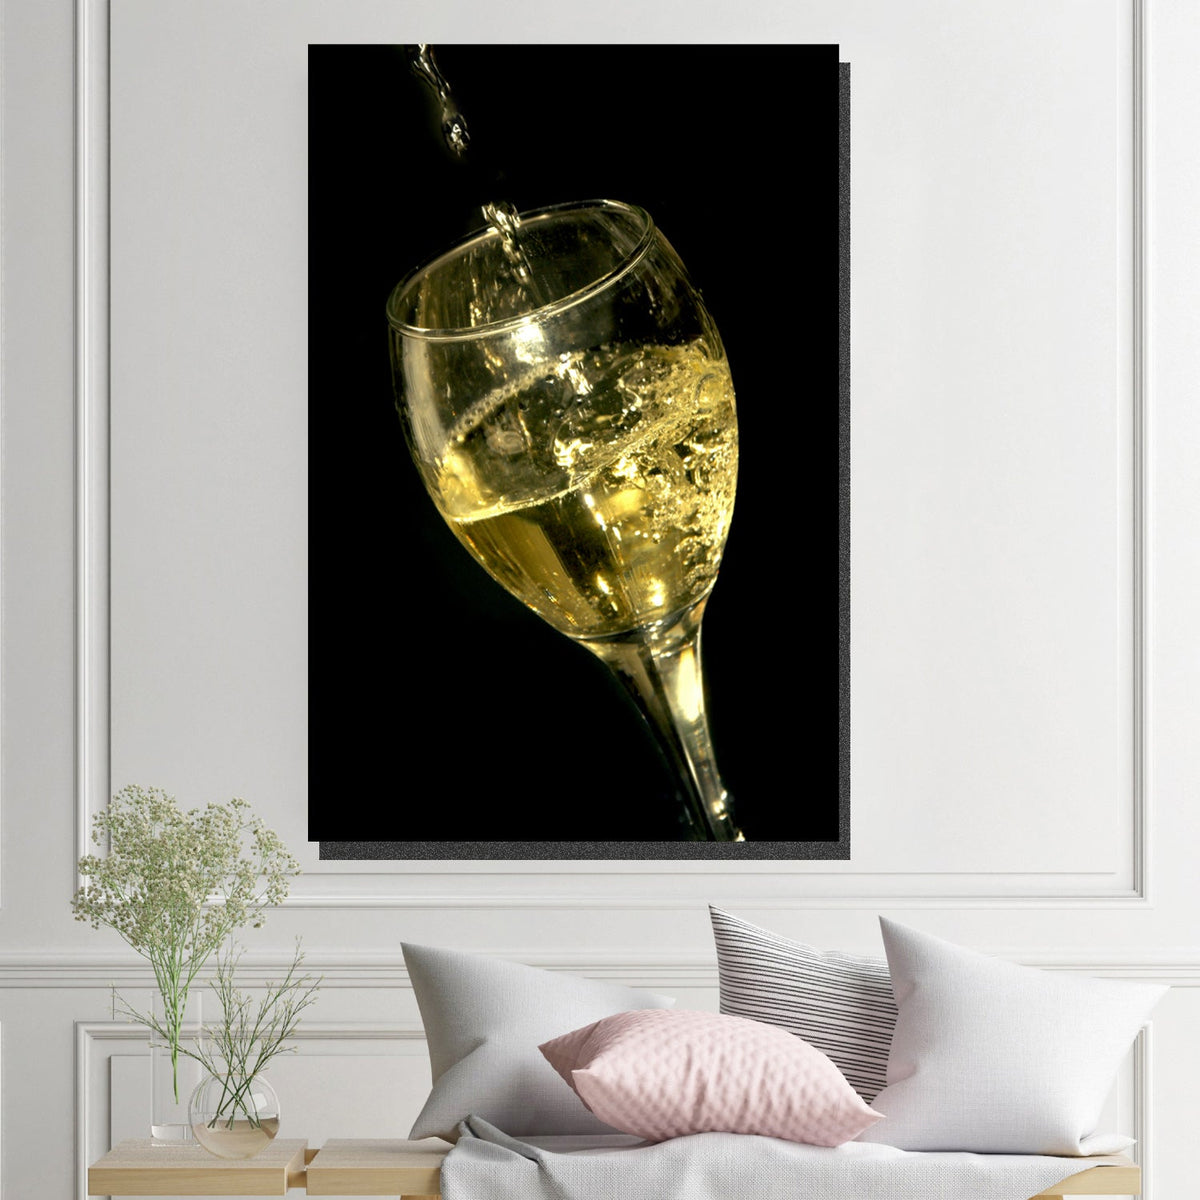 https://cdn.shopify.com/s/files/1/0387/9986/8044/products/GlassofChampagneCanvasArtprintStretched-3.jpg